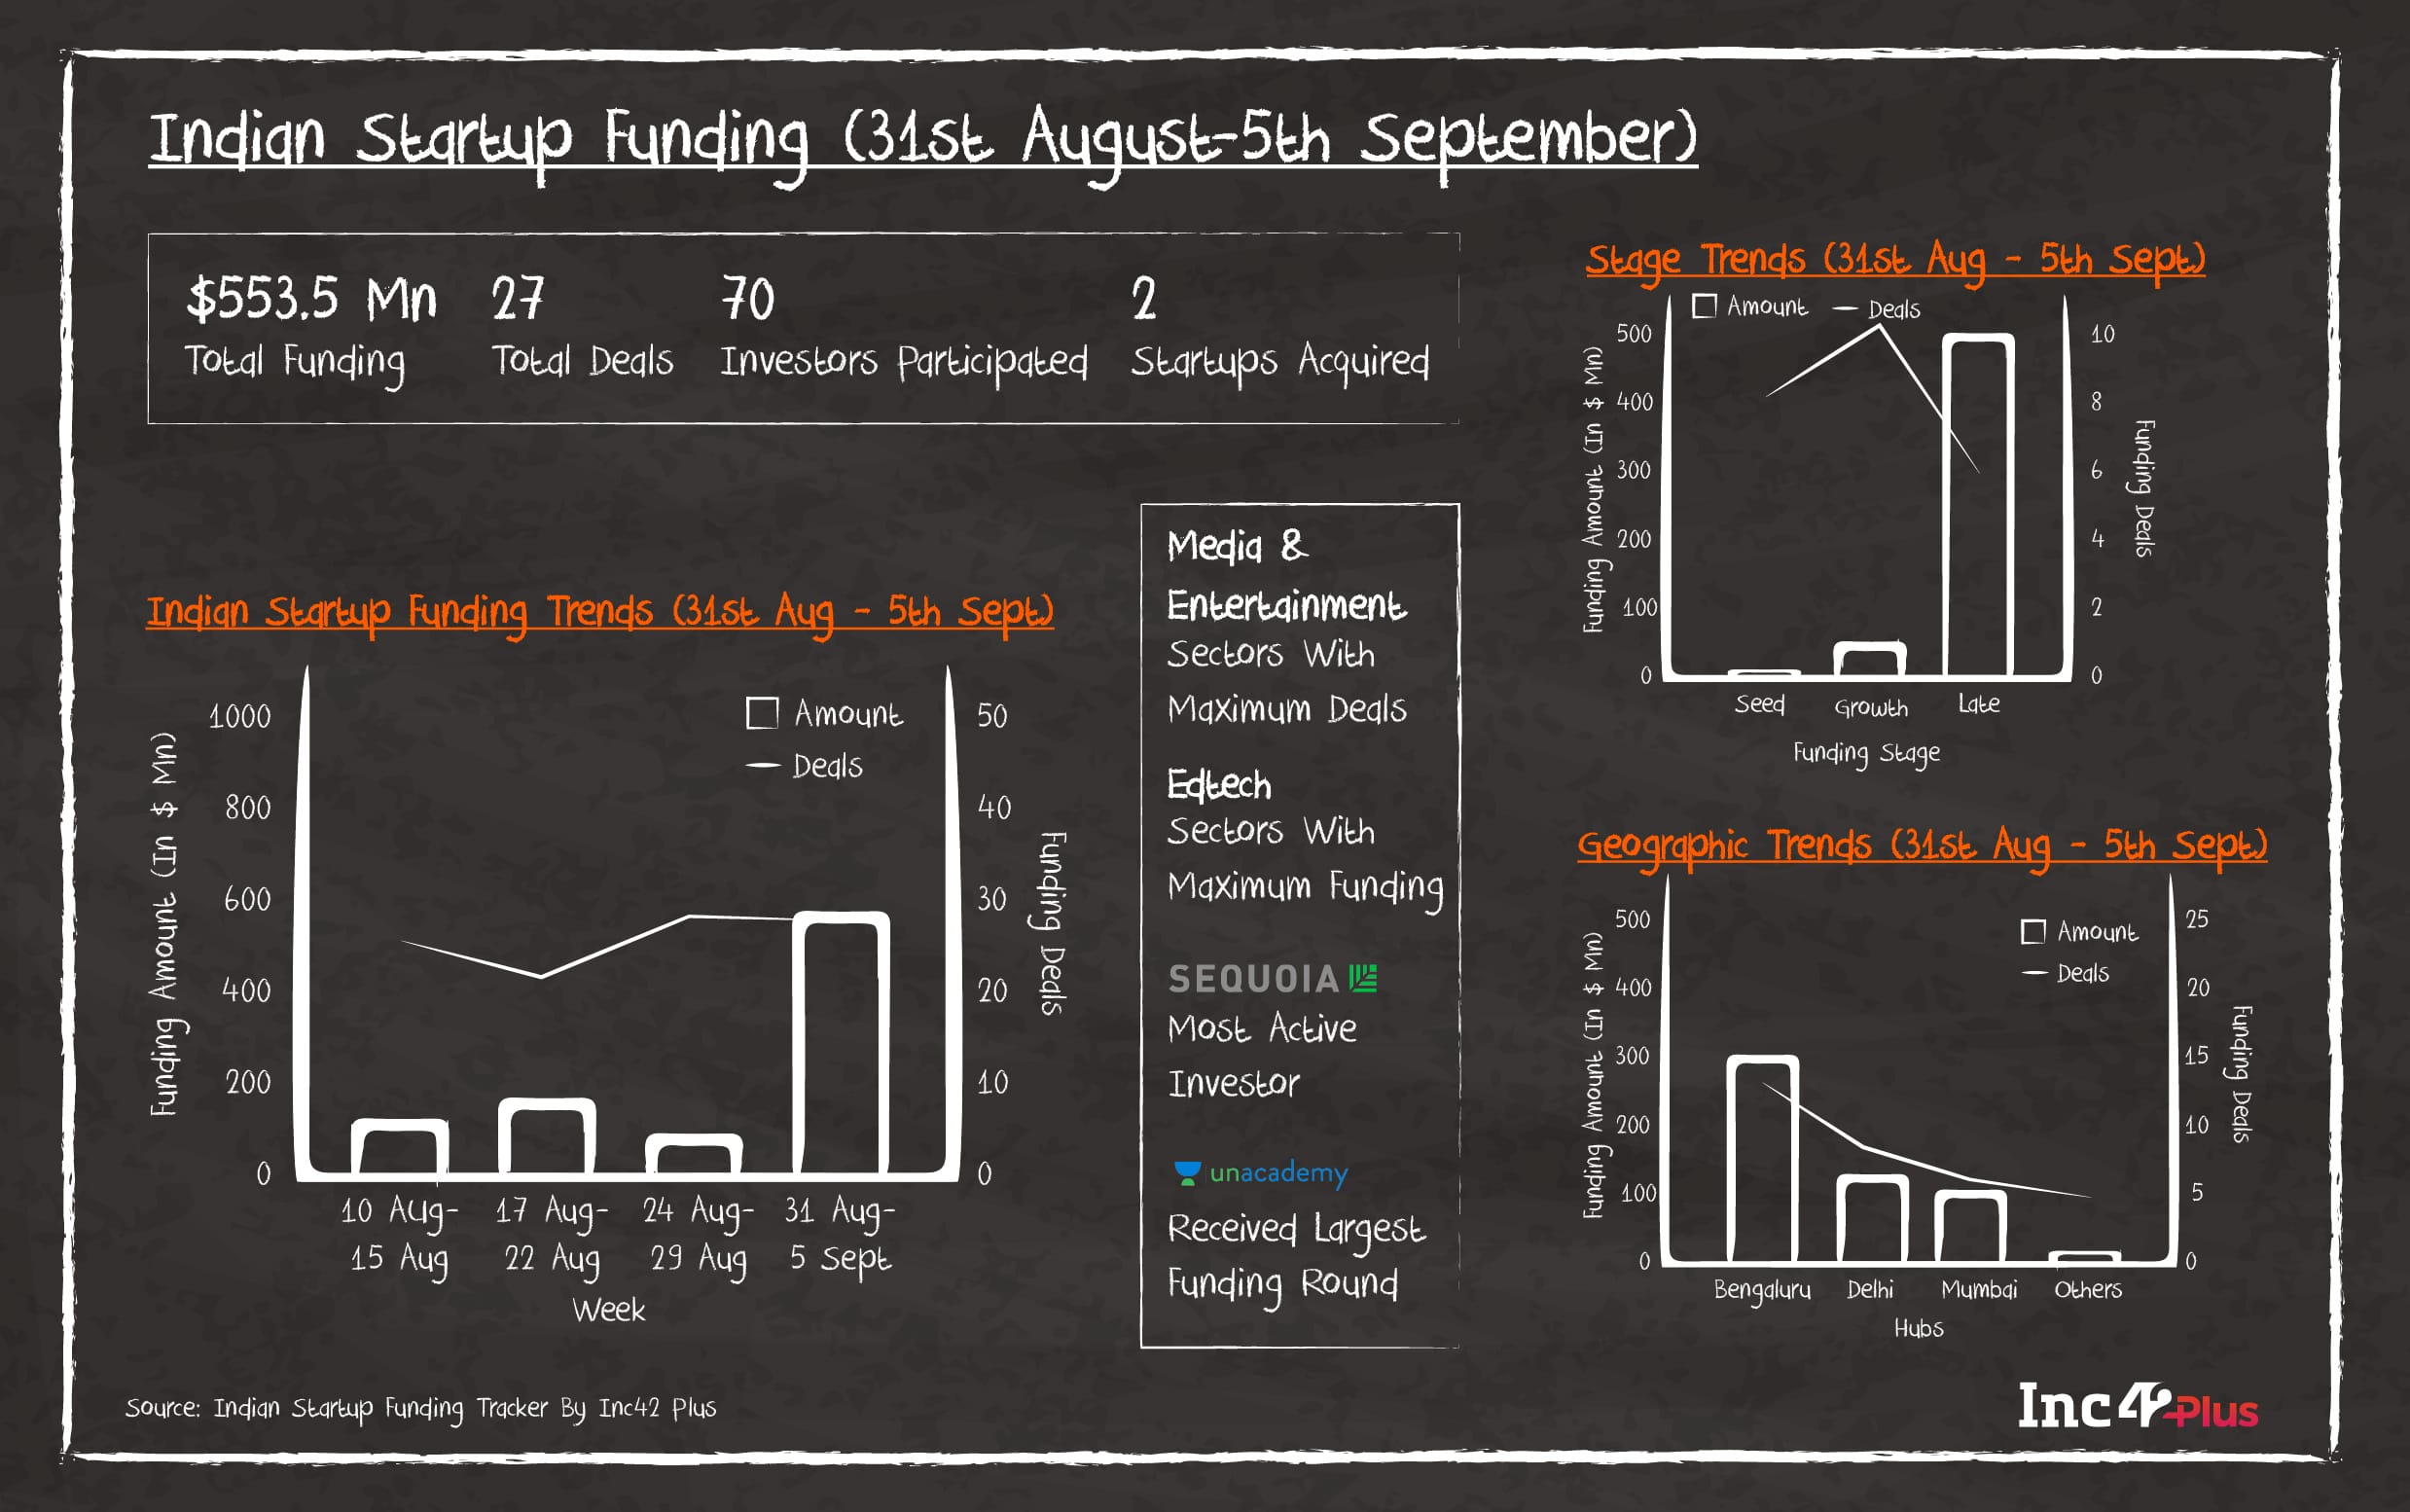 Funding Galore: Indian Startup Funding Of The Week [August 31- September 5]